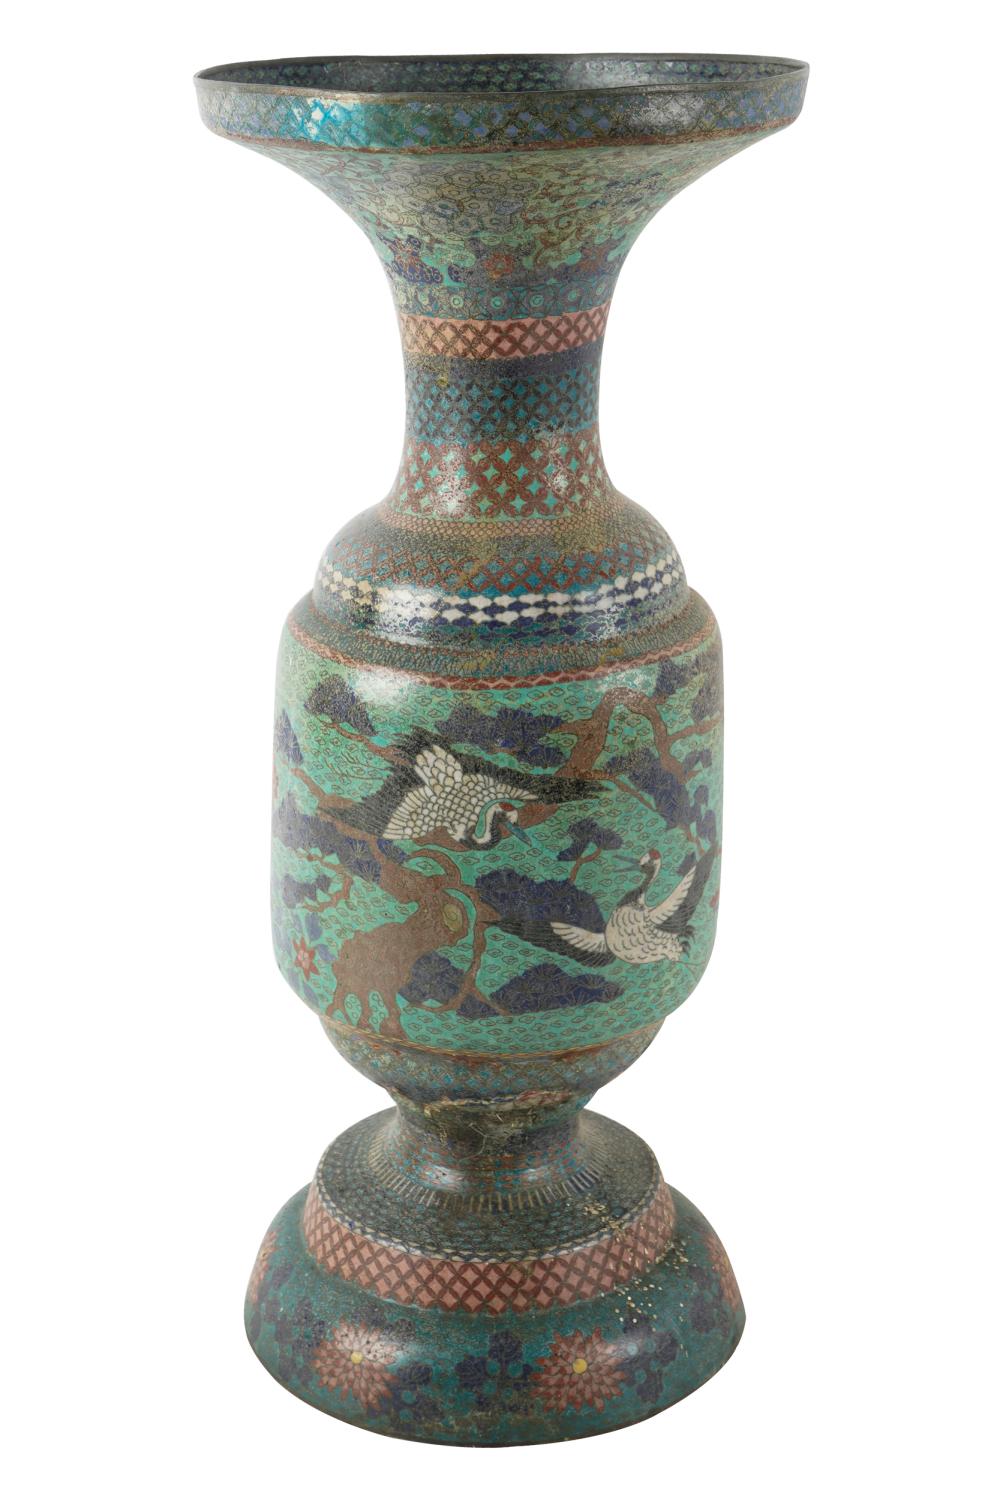 CLOISONNE VASEwith bird and floral 3329f3